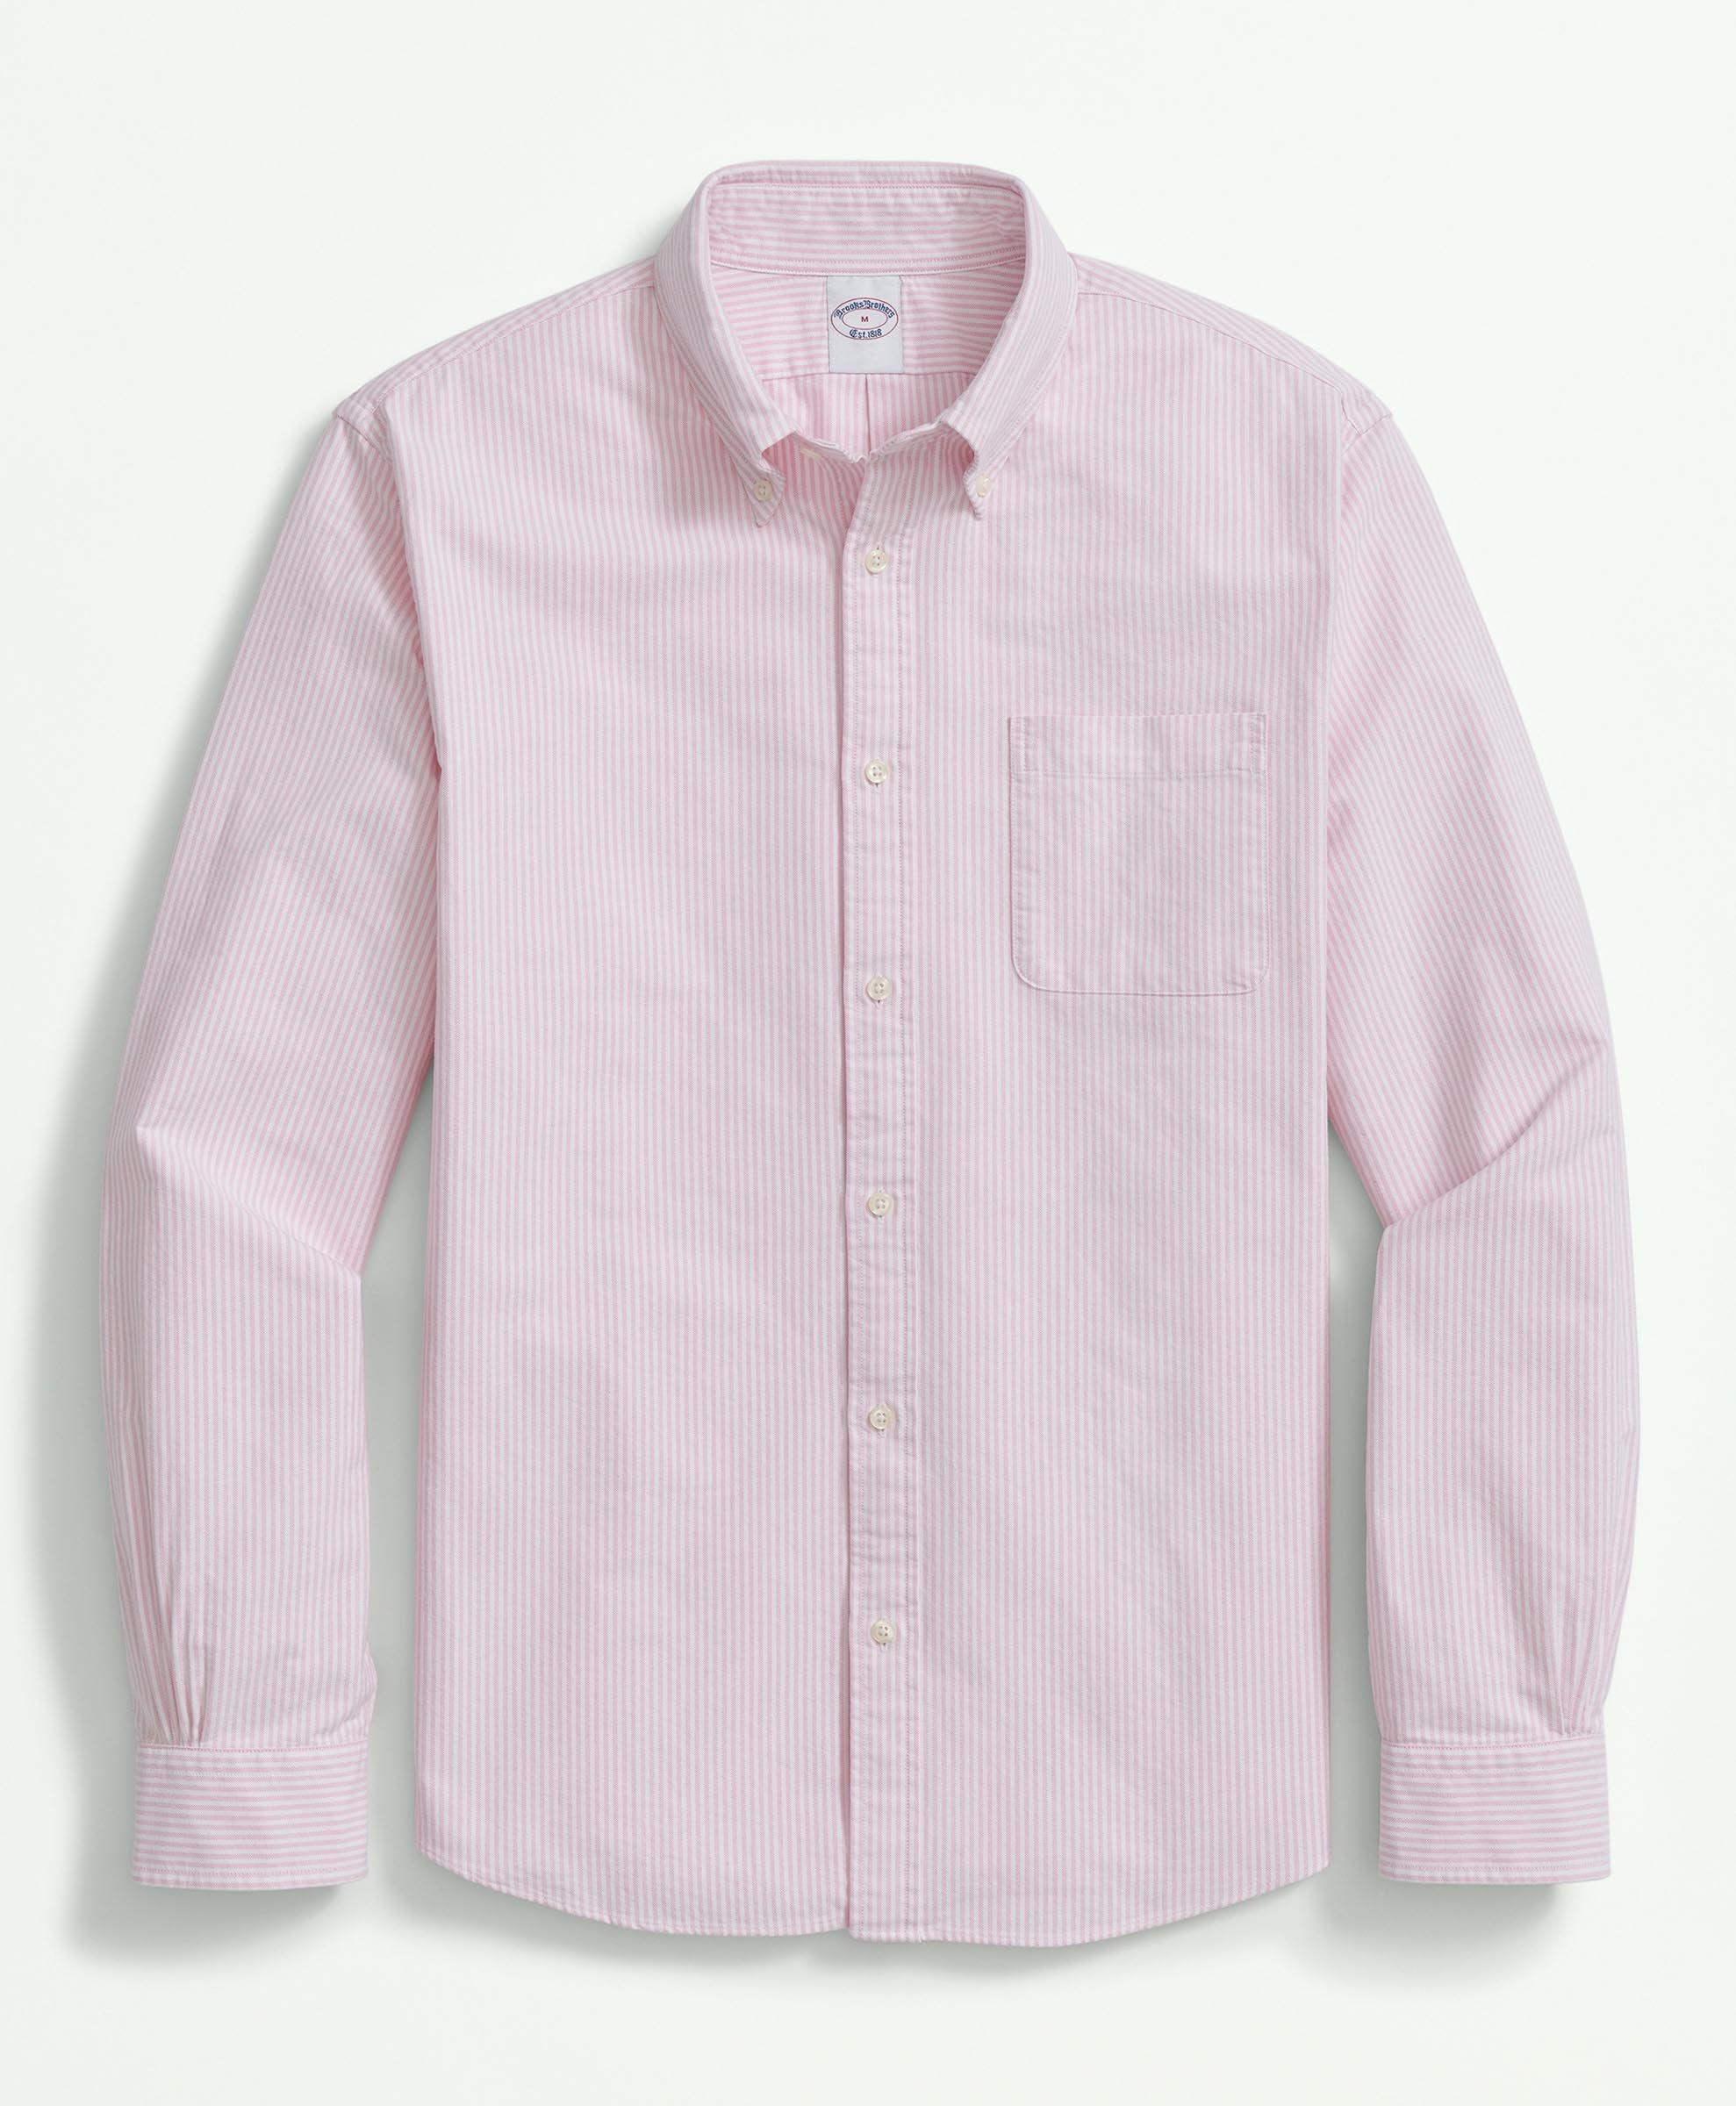 Brooks Brothers The New Friday Oxford Shirt, Candy Striped | Pink | Size Medium